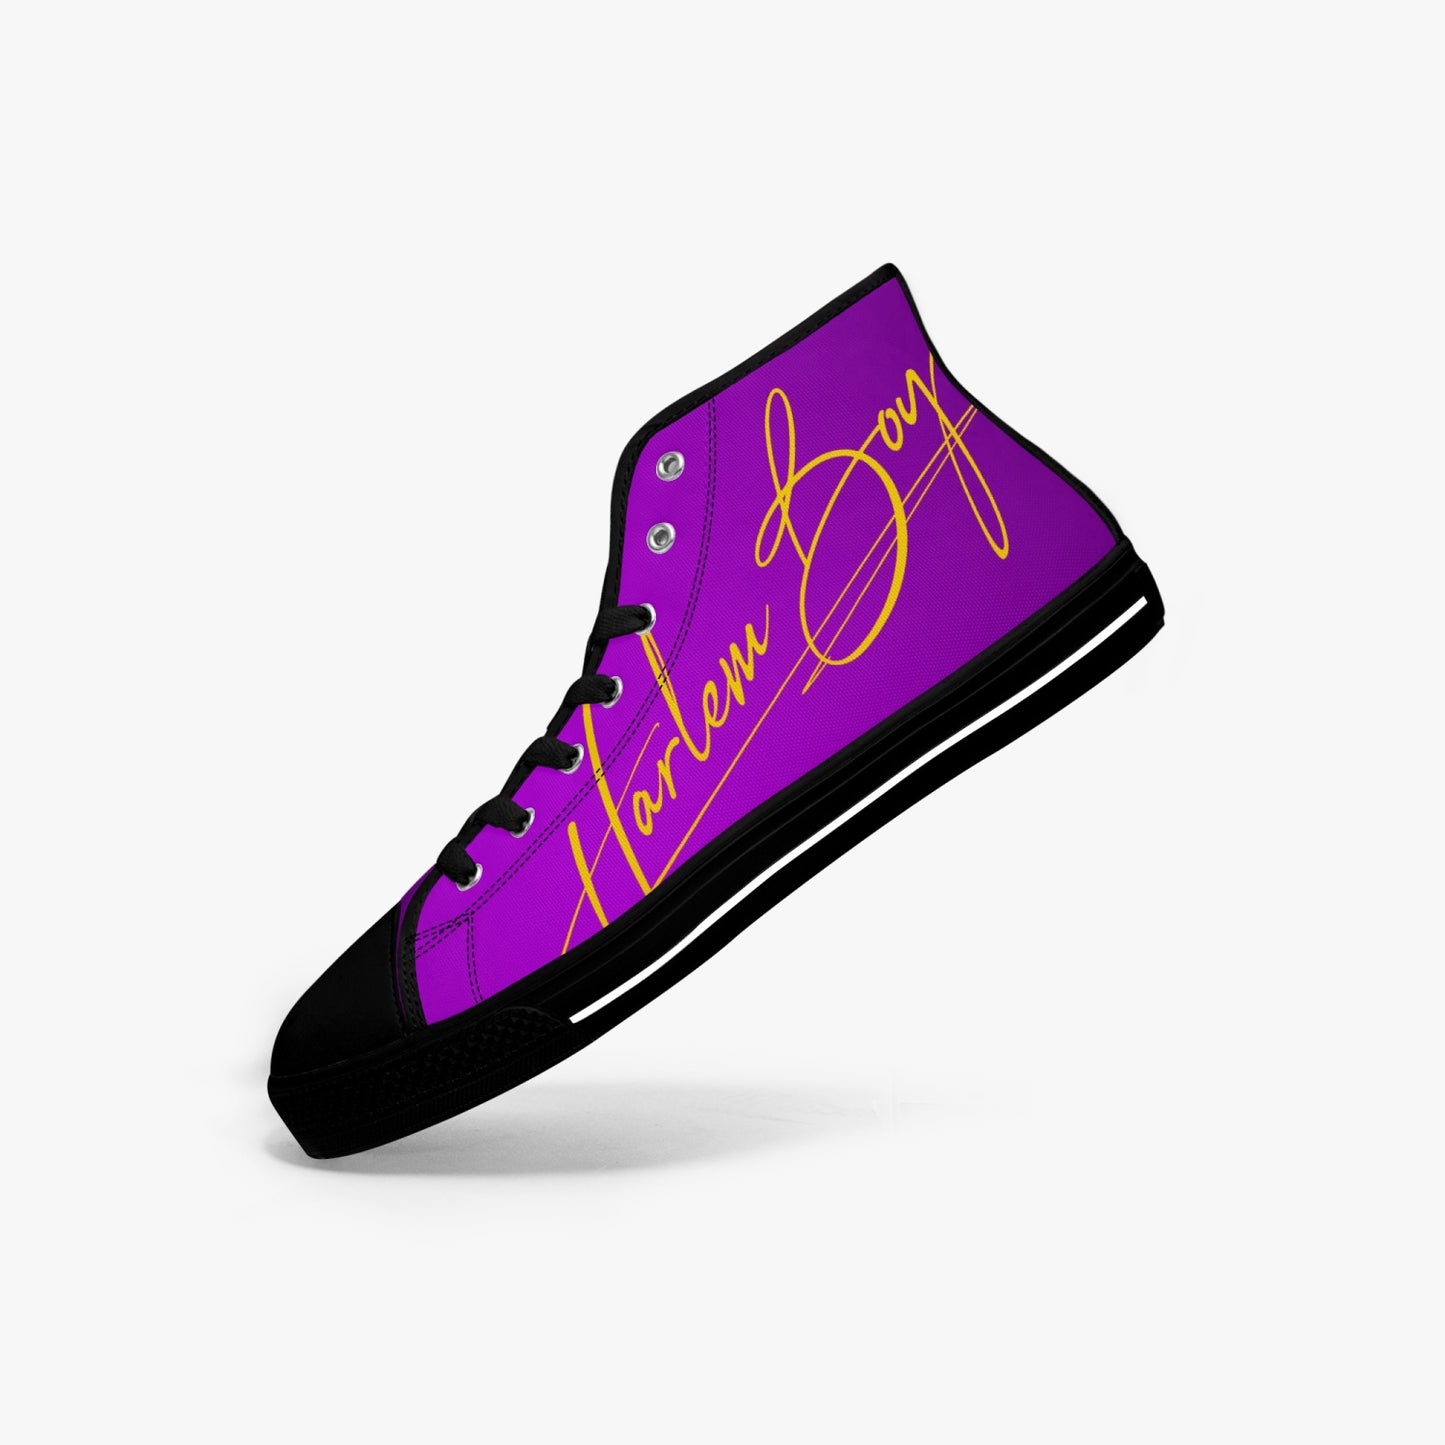 HB Harlem Boy "Lenox Ave" Classic High Top - Purple and Gold - Men (Black or White Soles)